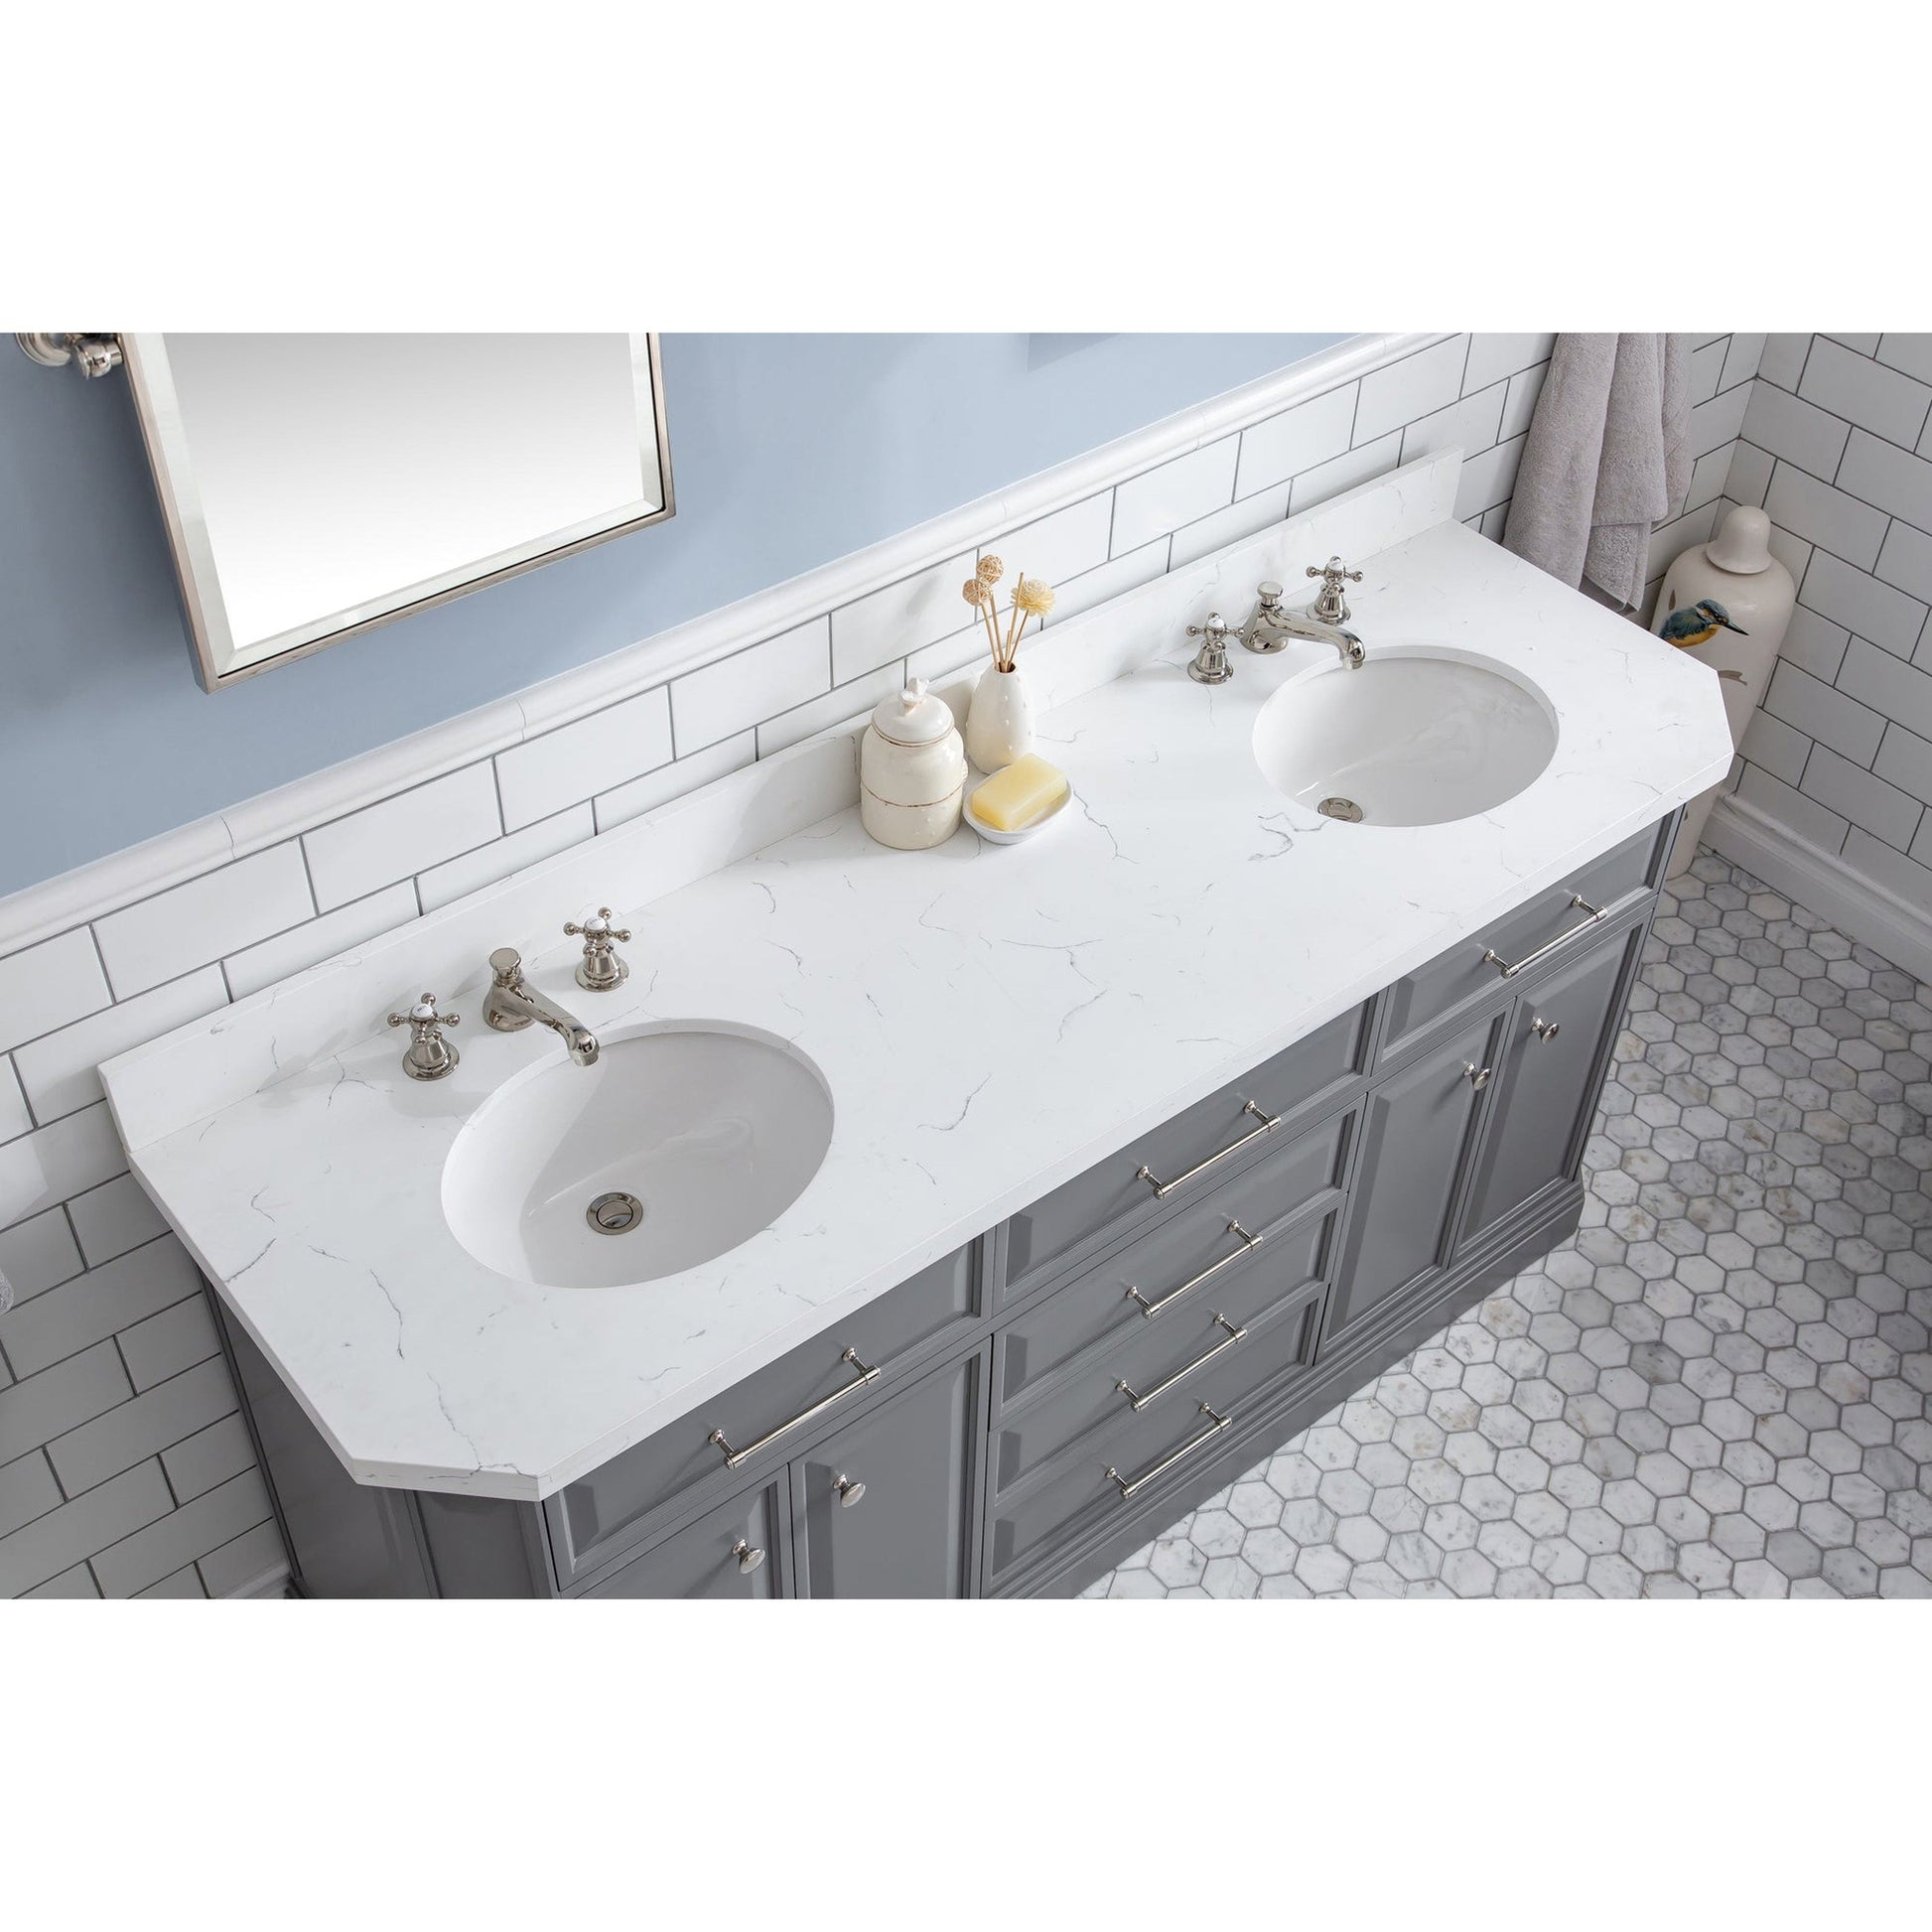 Water Creation Palace 72" Quartz Carrara Cashmere Grey Bathroom Vanity Set With Hardware And F2-0009 Faucets, Mirror in Polished Nickel (PVD) Finish